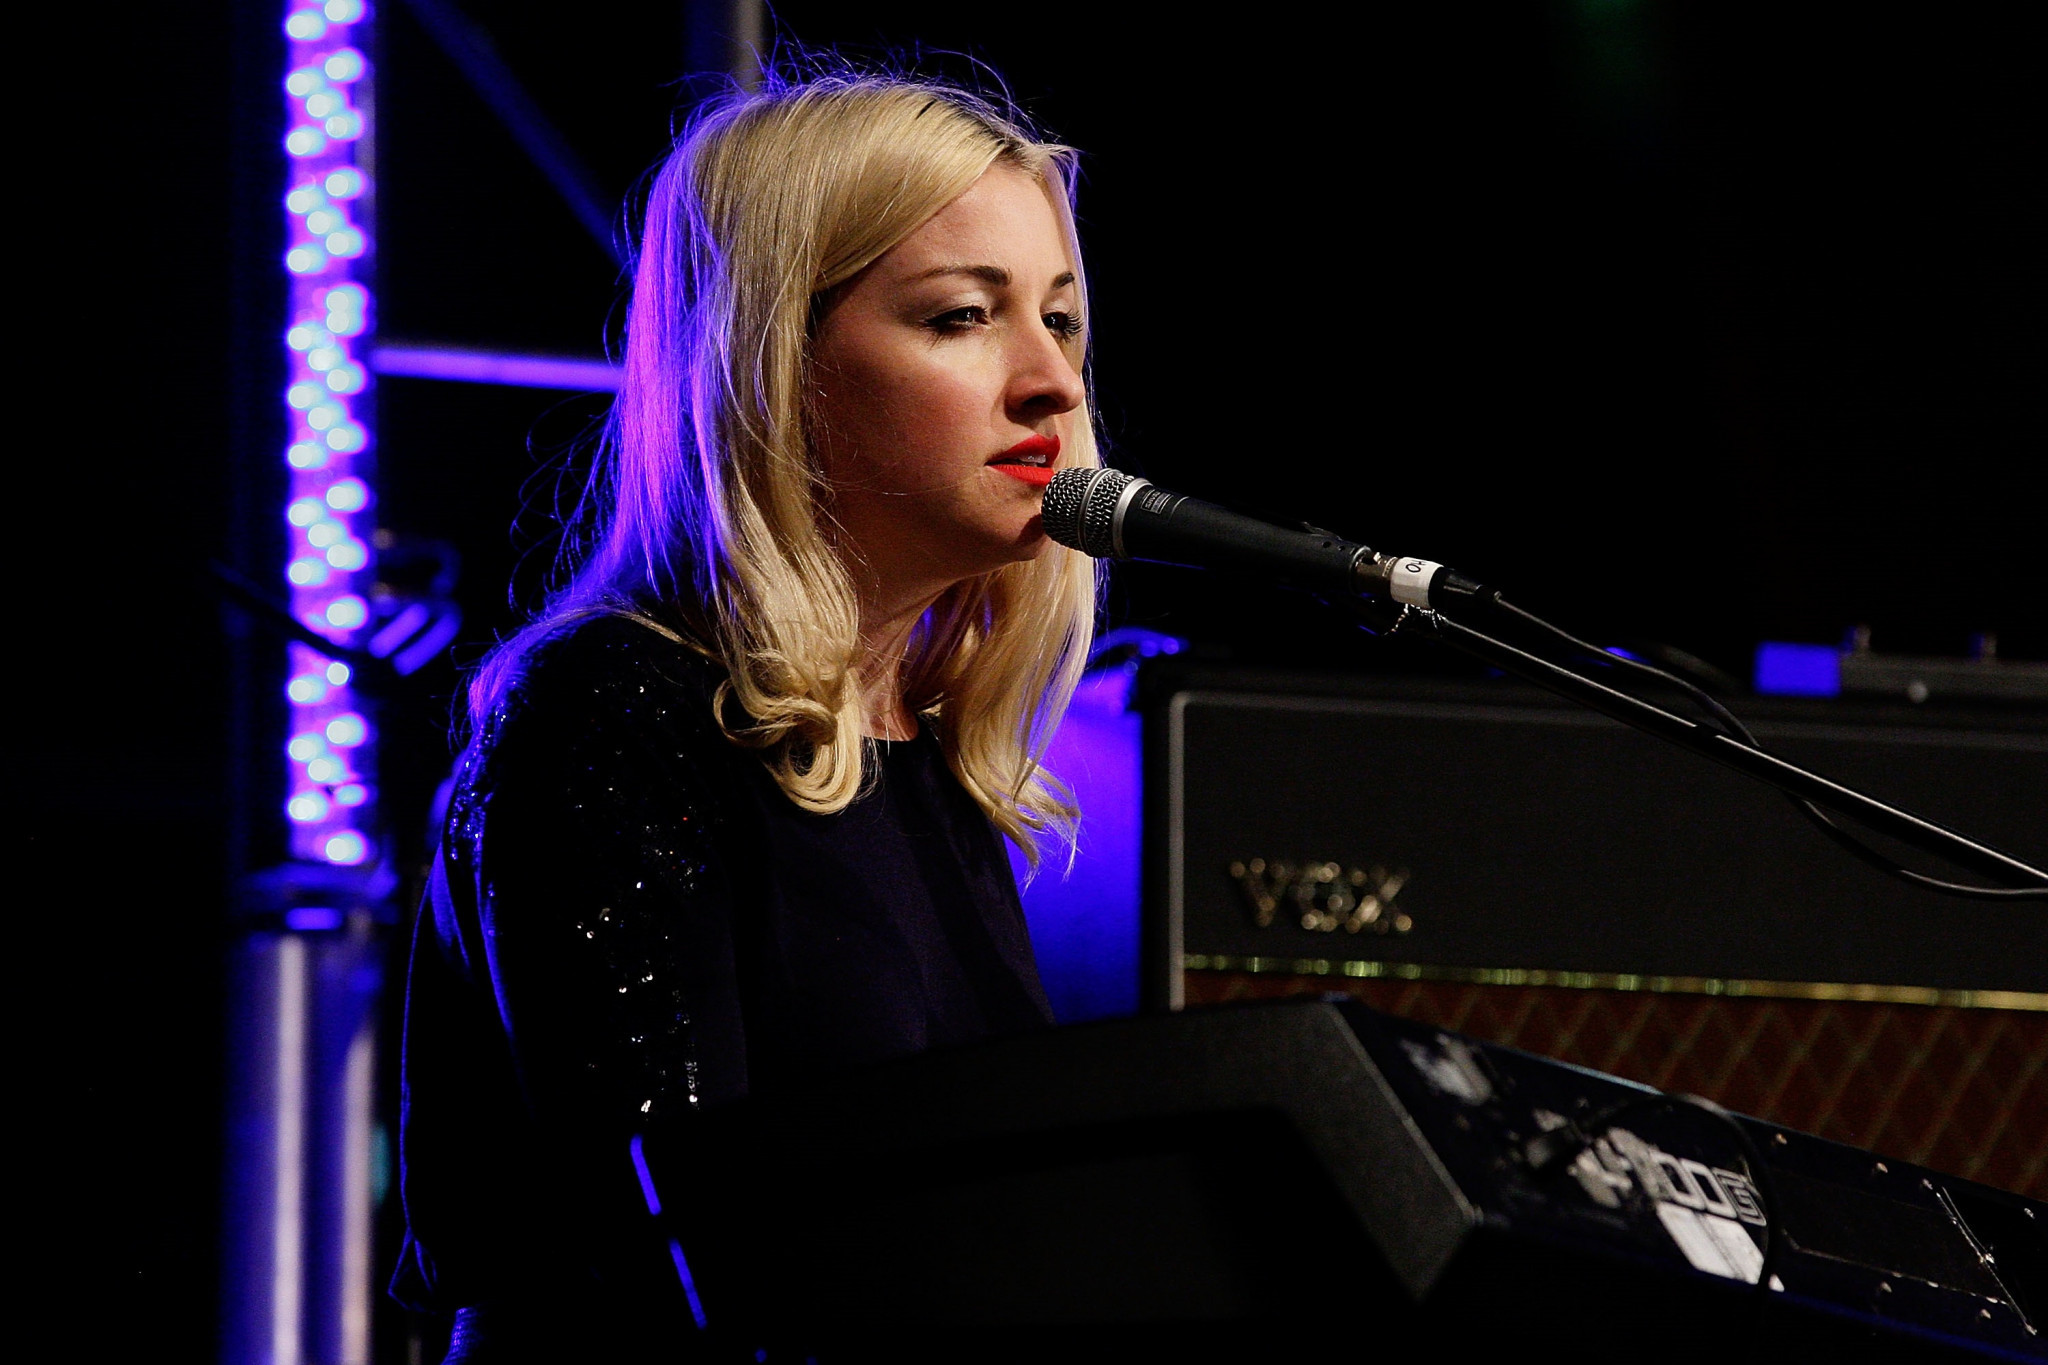 Brisbane-born Kate Miller-Heidke will feature on the Queensland Music Stage at Gold Coast 2018 ©Getty Images